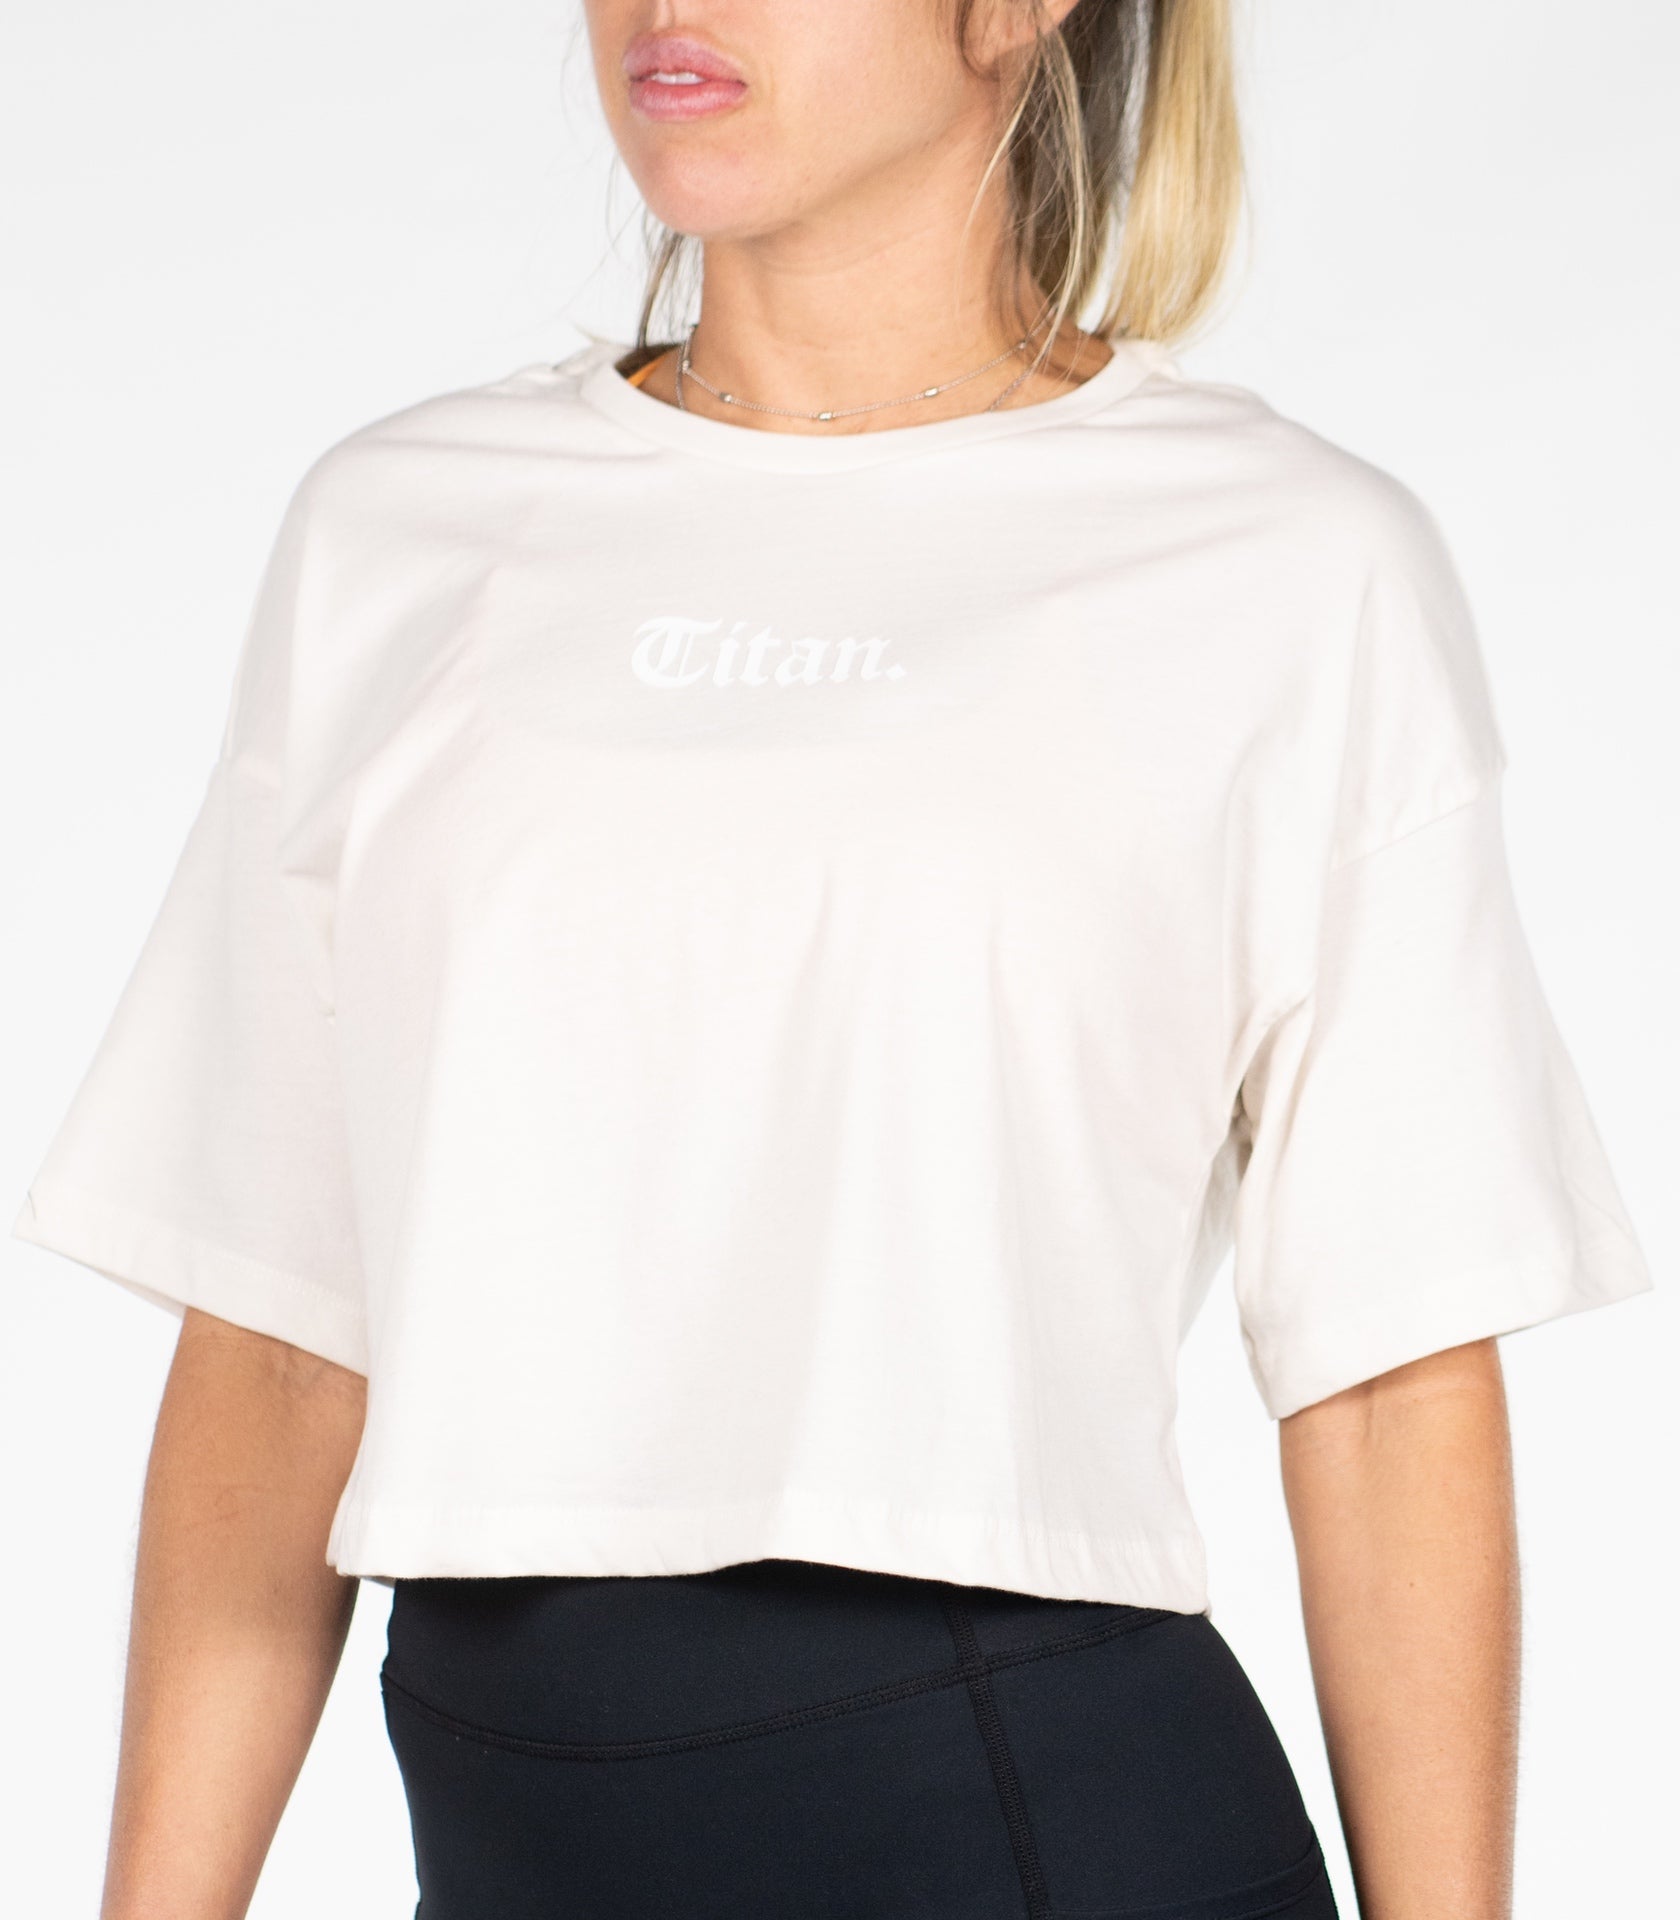 Statement Cropped Tee